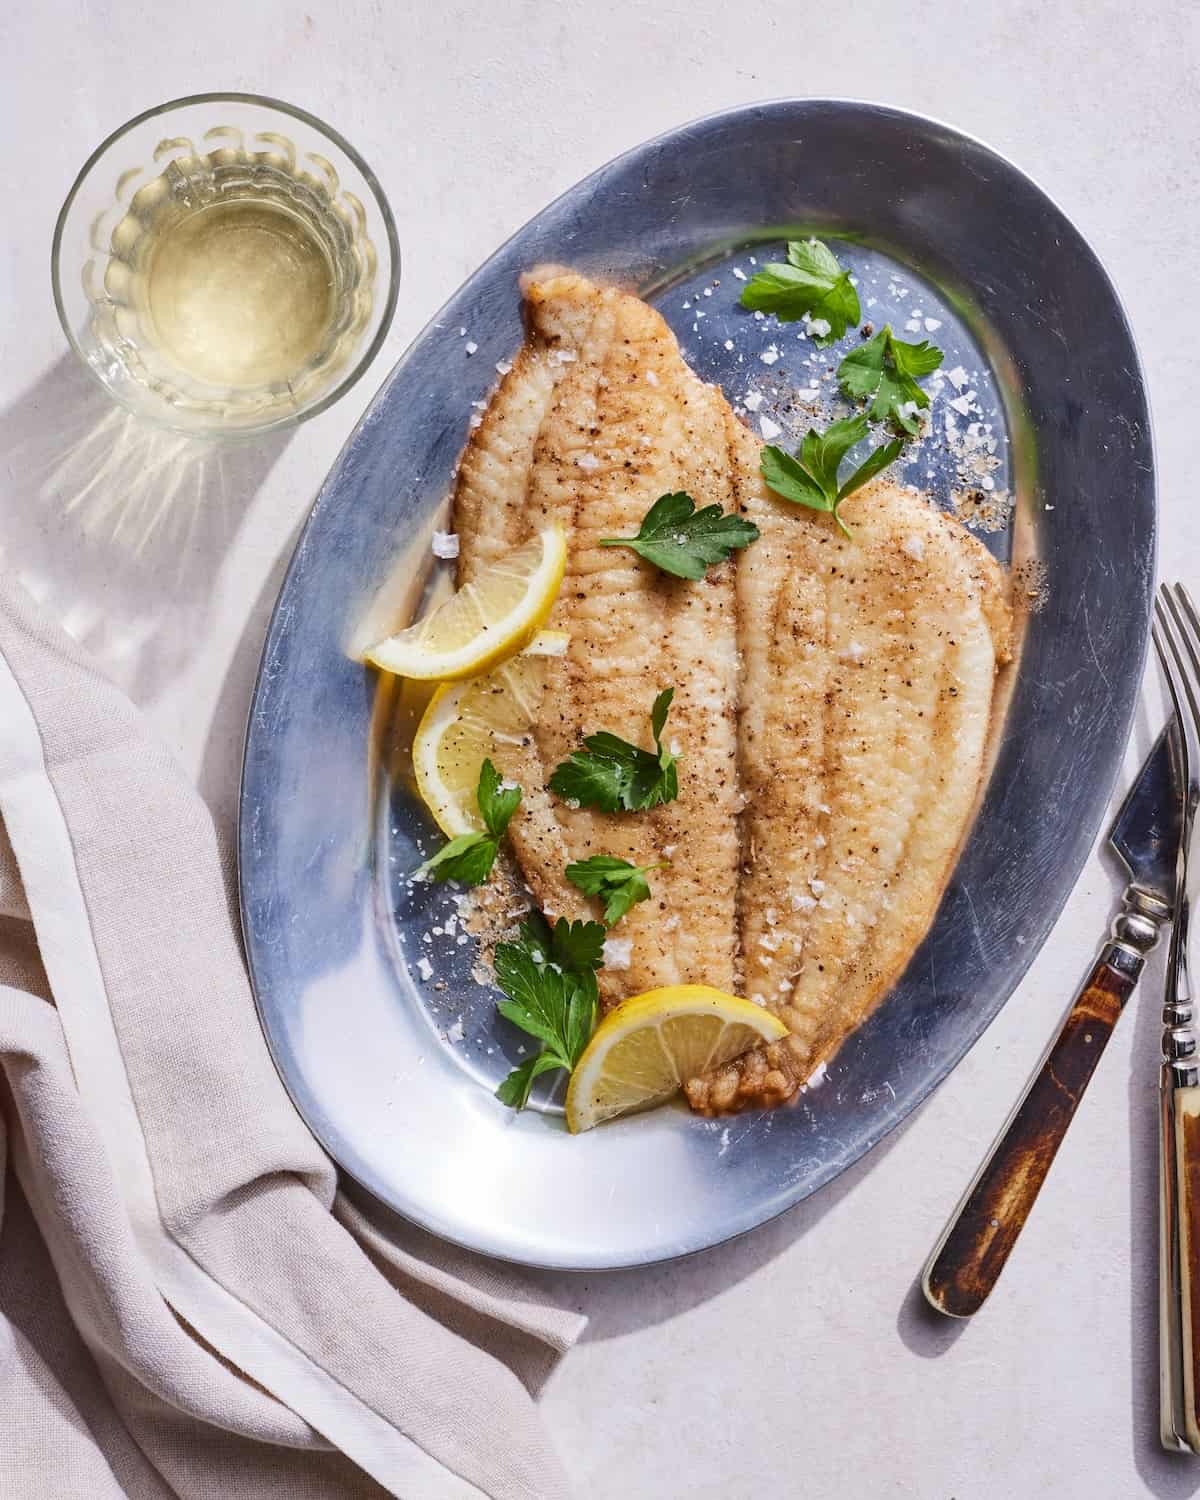 https://whatsgabycooking.com/wp-content/uploads/2023/12/WGC-Pan-Fried-Sole-with-Lemon-and-Herbs.jpg